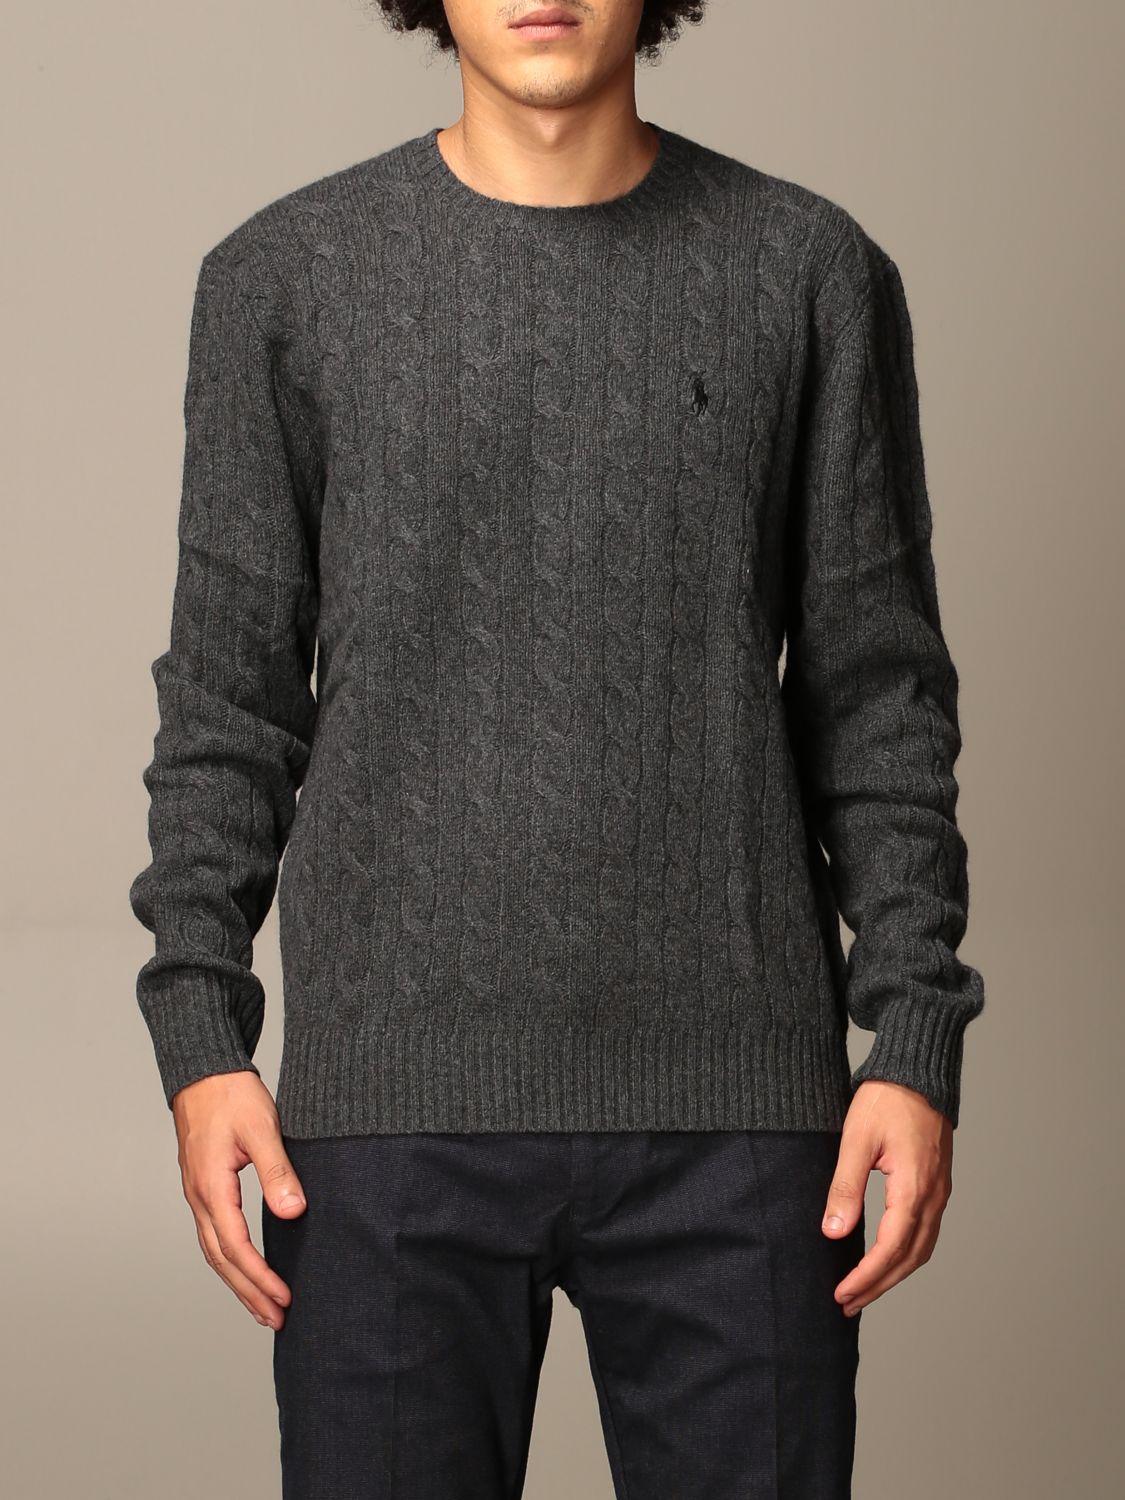 POLO RALPH LAUREN: pullover in cable-knit wool and cashmere - Grey | Polo  Ralph Lauren sweater 710719546 online on 